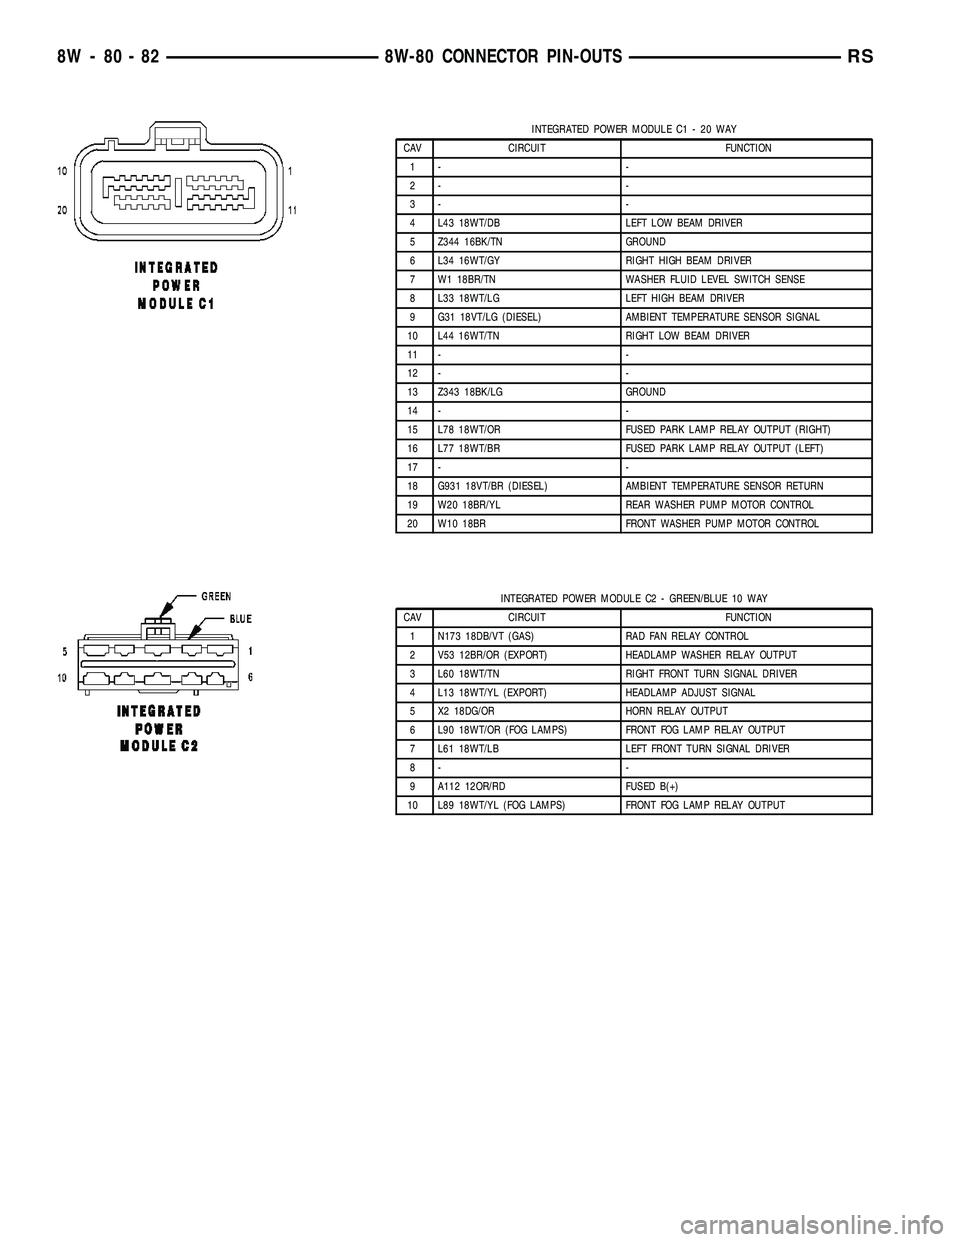 CHRYSLER VOYAGER 2005  Service Manual INTEGRATED POWER MODULE C1 - 20 WAY
CAV CIRCUIT FUNCTION
1- -
2- -
3- -
4 L43 18WT/DB LEFT LOW BEAM DRIVER
5 Z344 16BK/TN GROUND
6 L34 16WT/GY RIGHT HIGH BEAM DRIVER
7 W1 18BR/TN WASHER FLUID LEVEL SW